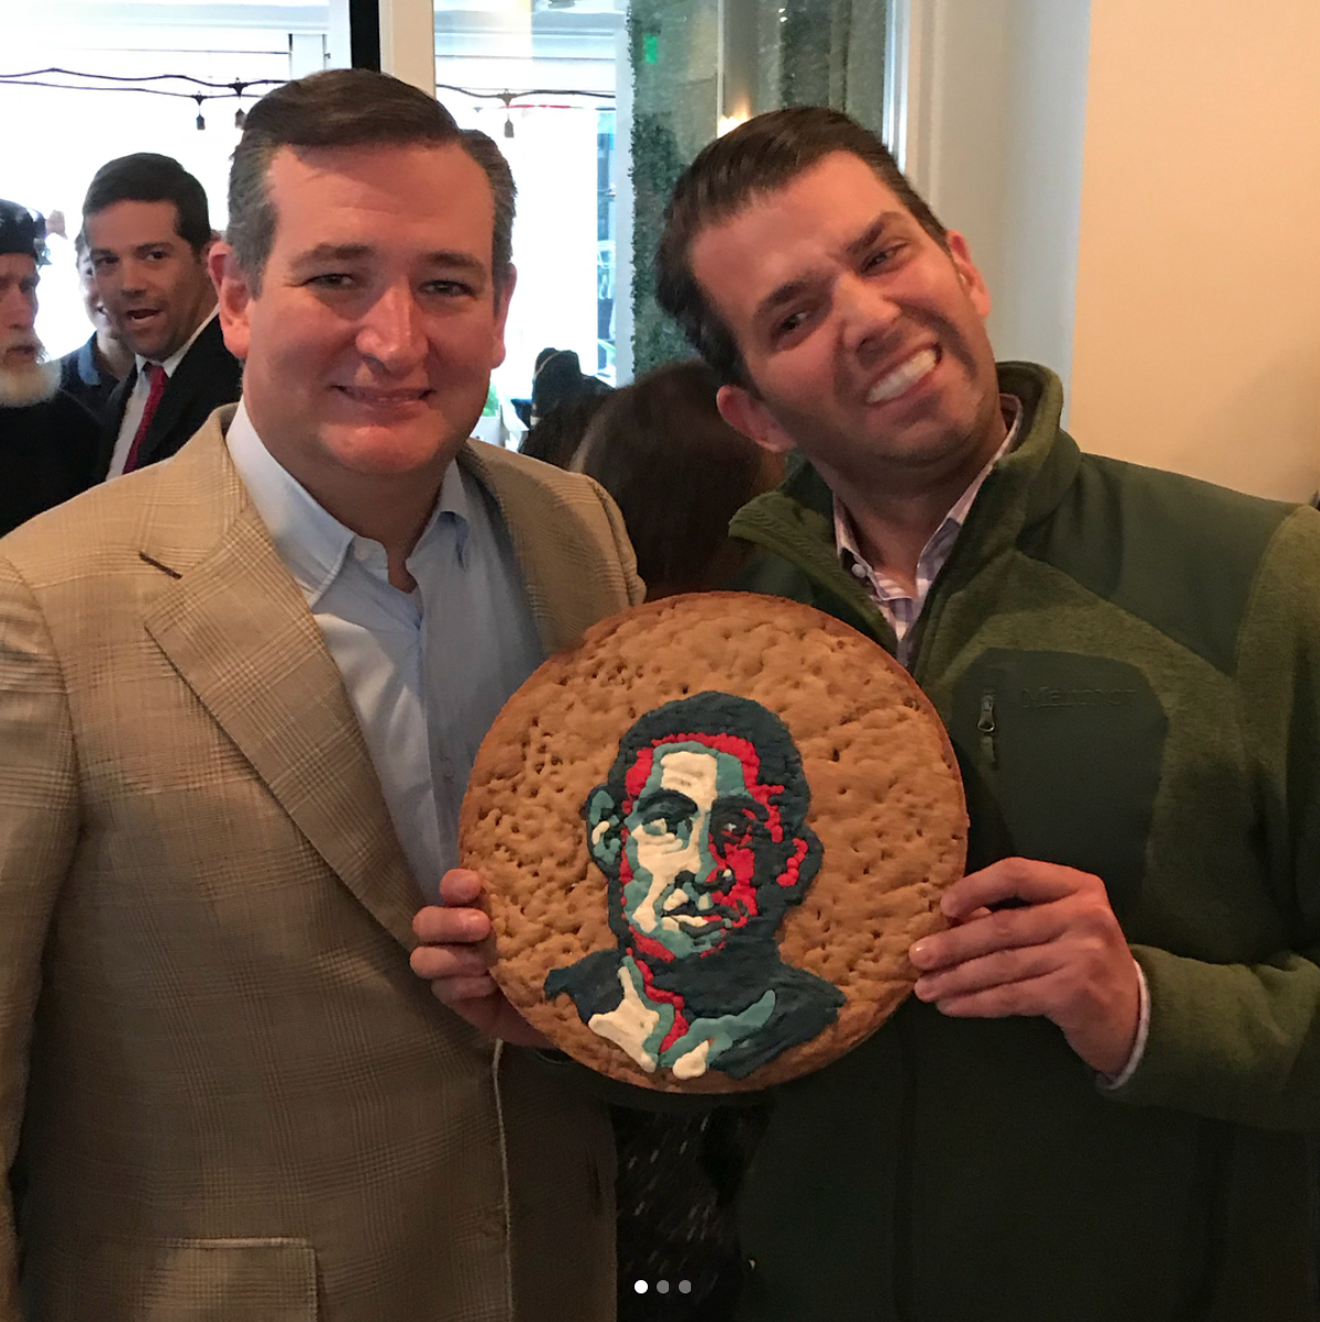 Donald Trump Jr. posted this photo — taken at Dallas restaurant  Le Bilboquet — of him posing with Sen. Ted Cruz and a cookie cake depicting former President Barack Obama.